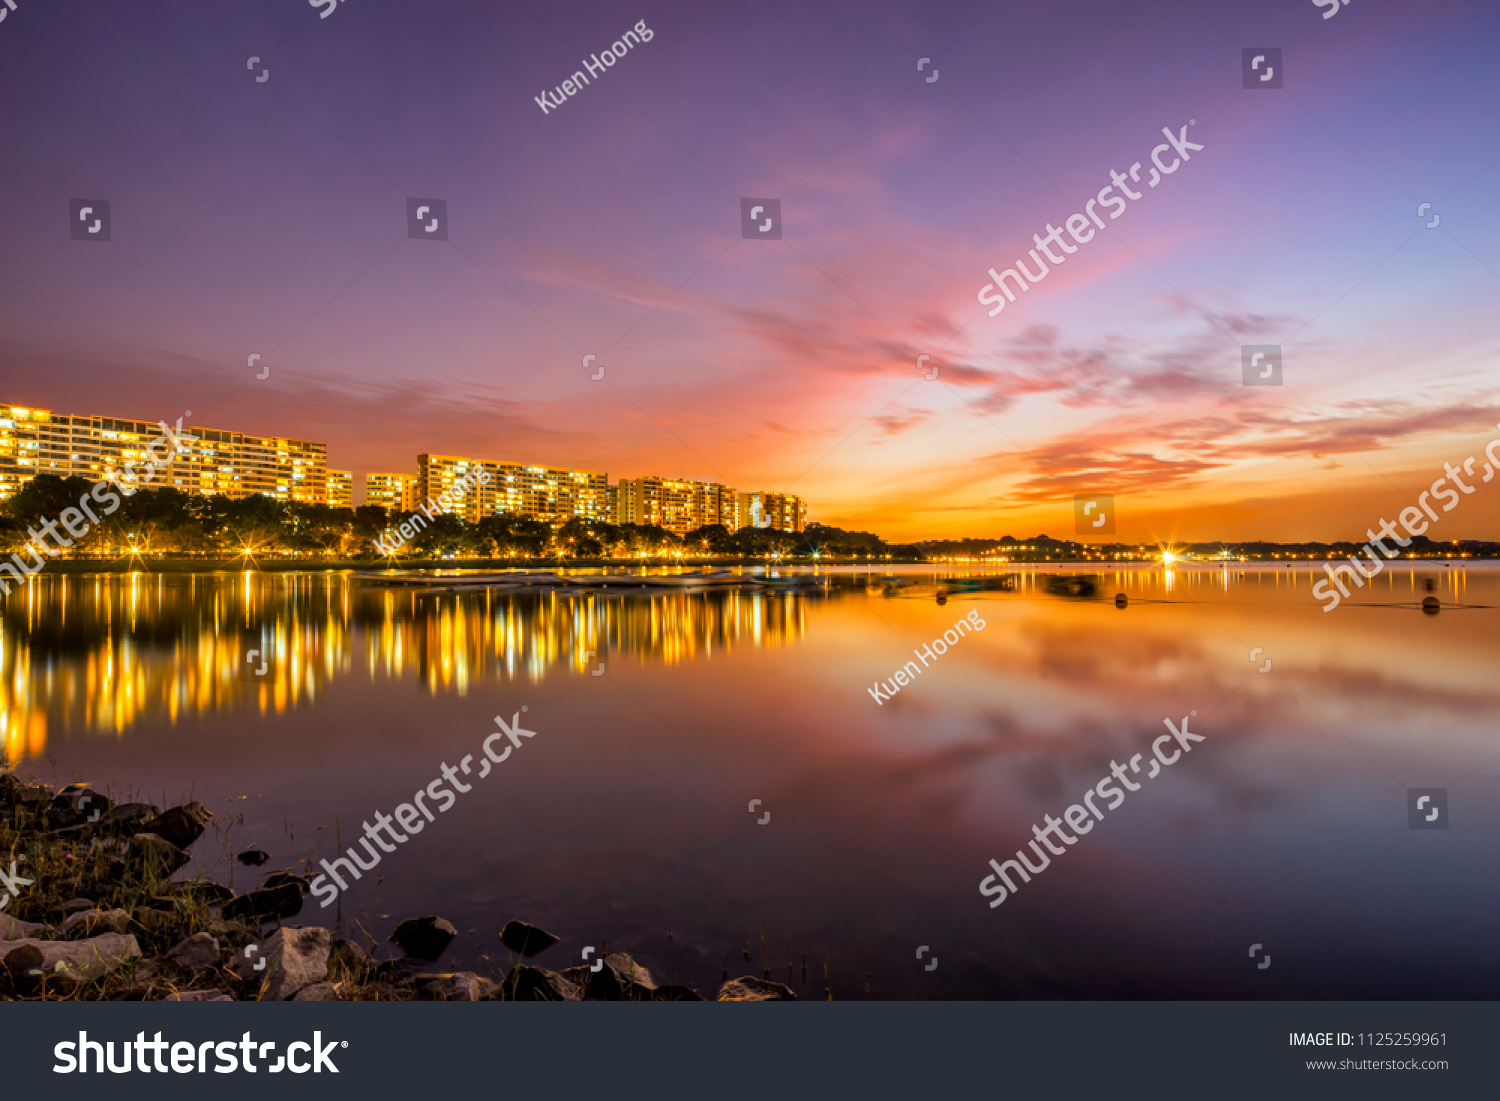 Sunset view of Bedok Reservoir, Singapore with colorful skyline and reflection #1125259961